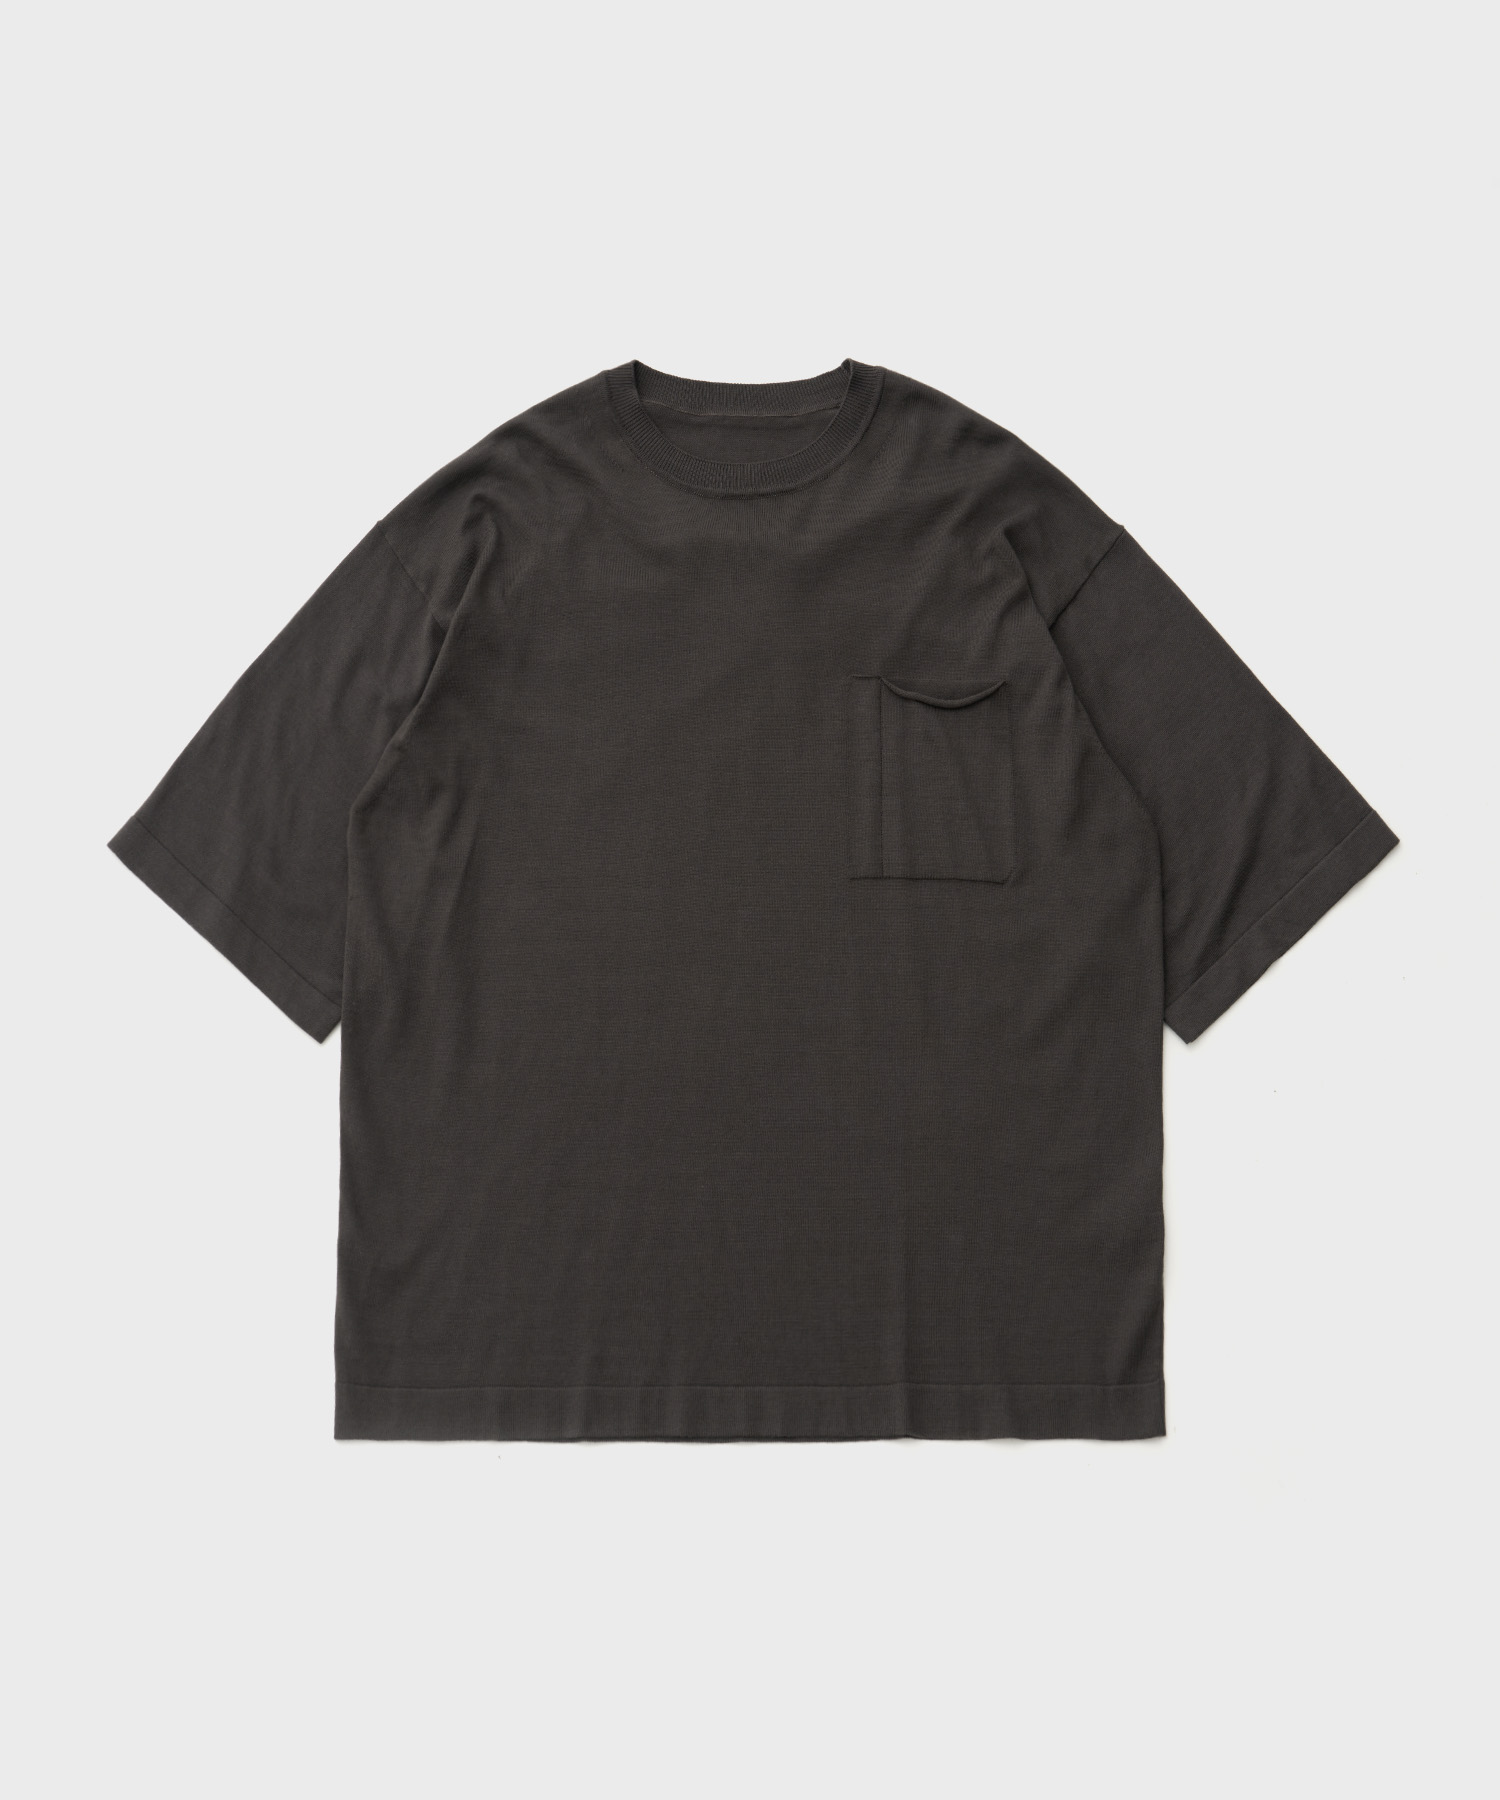 Suvin Cotton S/S (Charcoal)